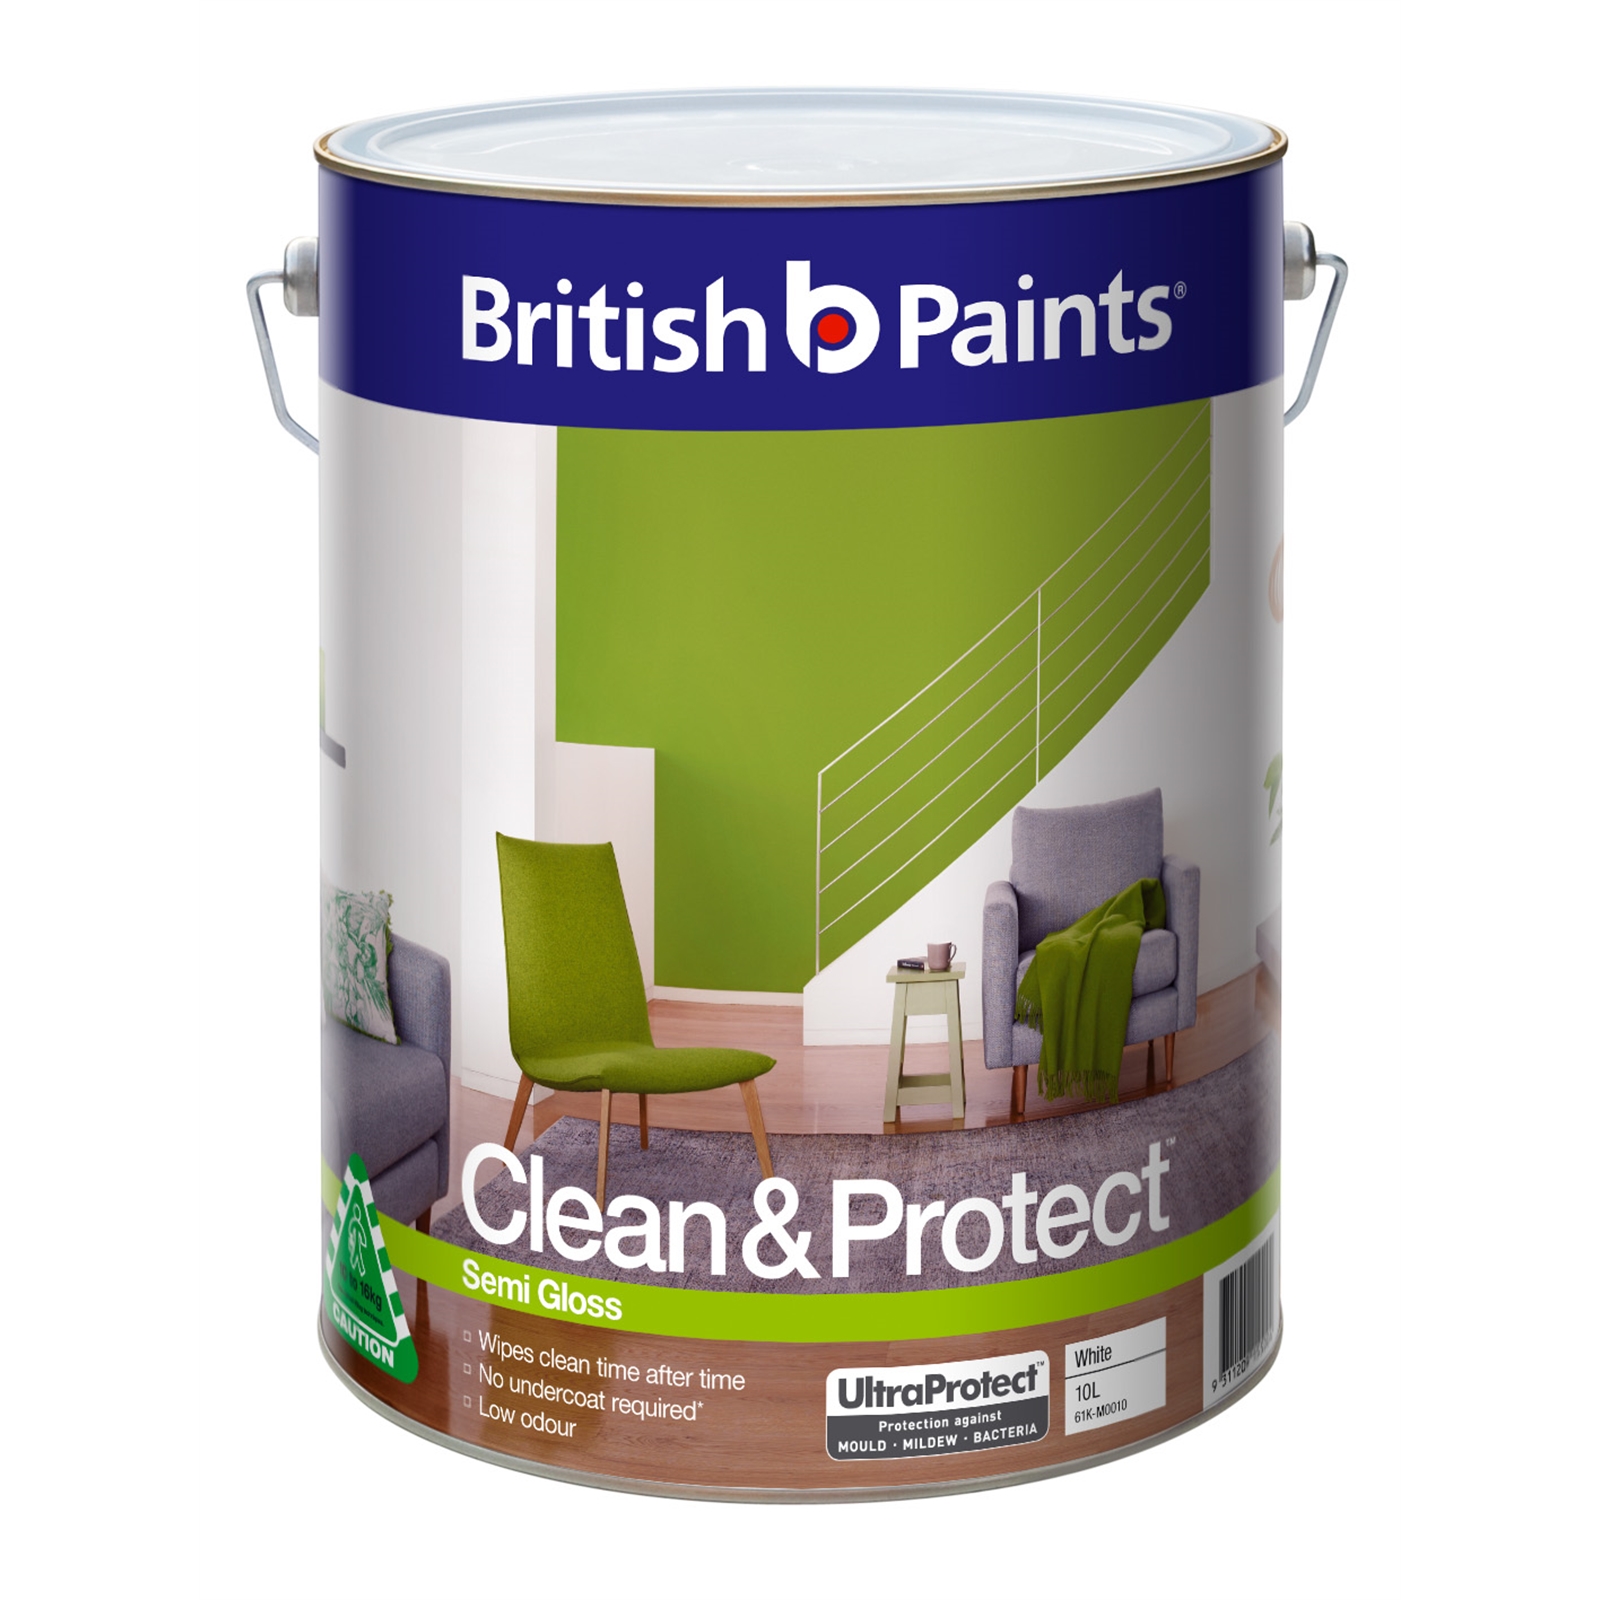 British Paints Clean & Protect 10L Semi Gloss White Interior Paint